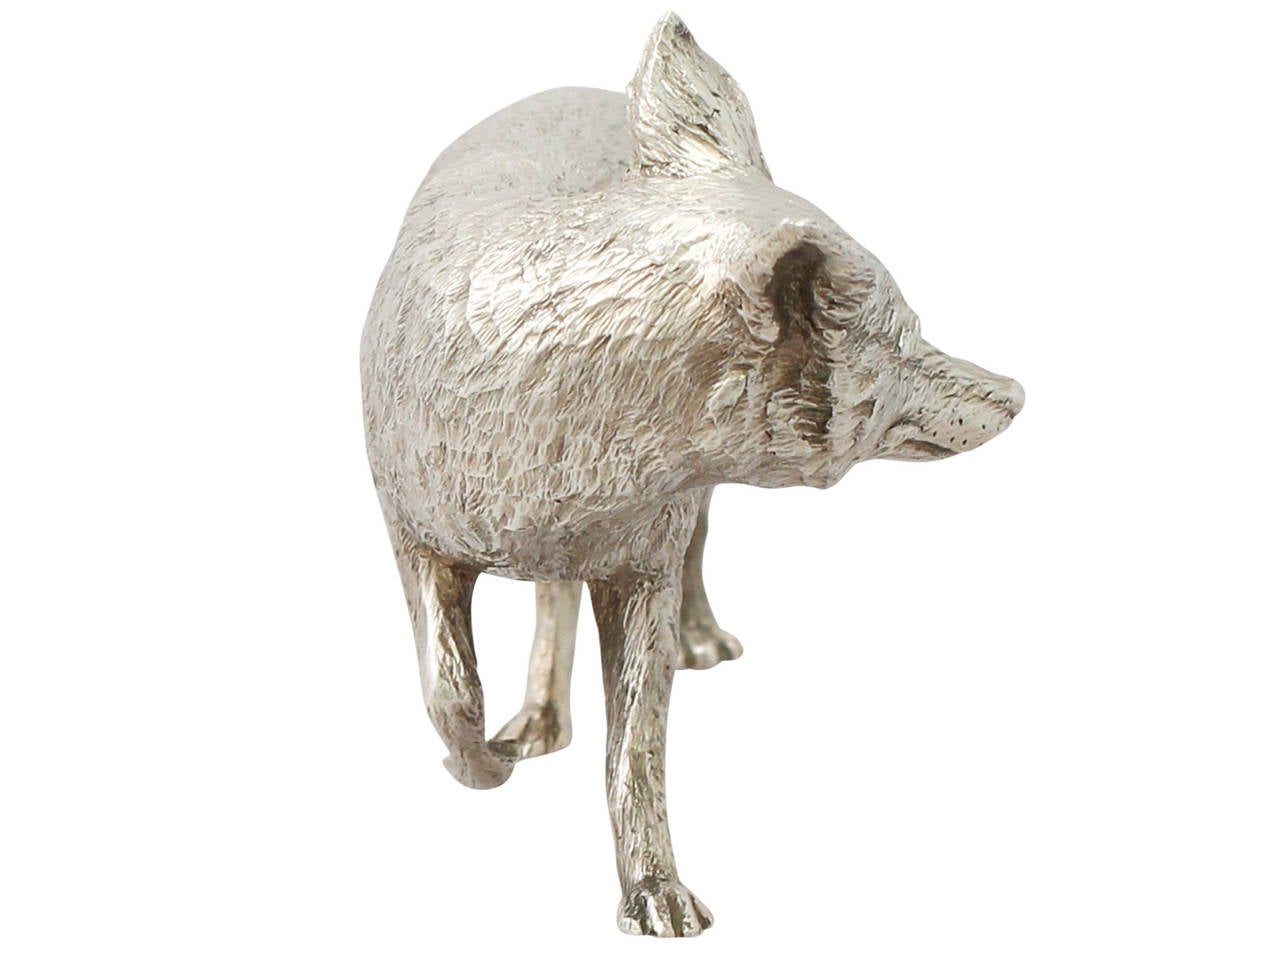 A fine contemporary English cast sterling silver model of a fox; part of our ornamental silverware collection.

This fine contemporary cast sterling silver ornament has been realistically modelled in the form of a fox regardant.

This piece has